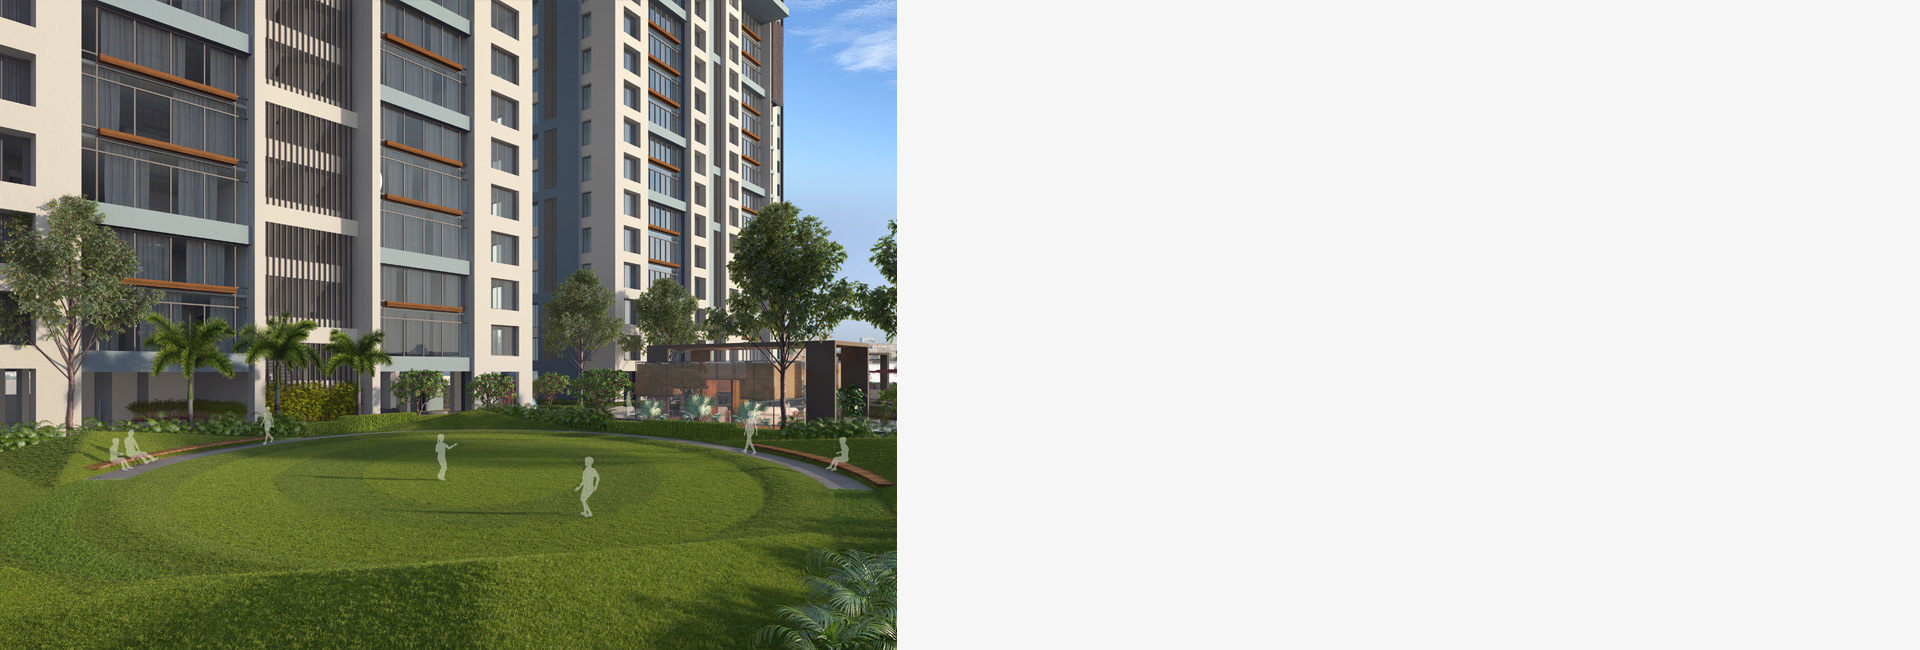 5 BHK Project in surat 